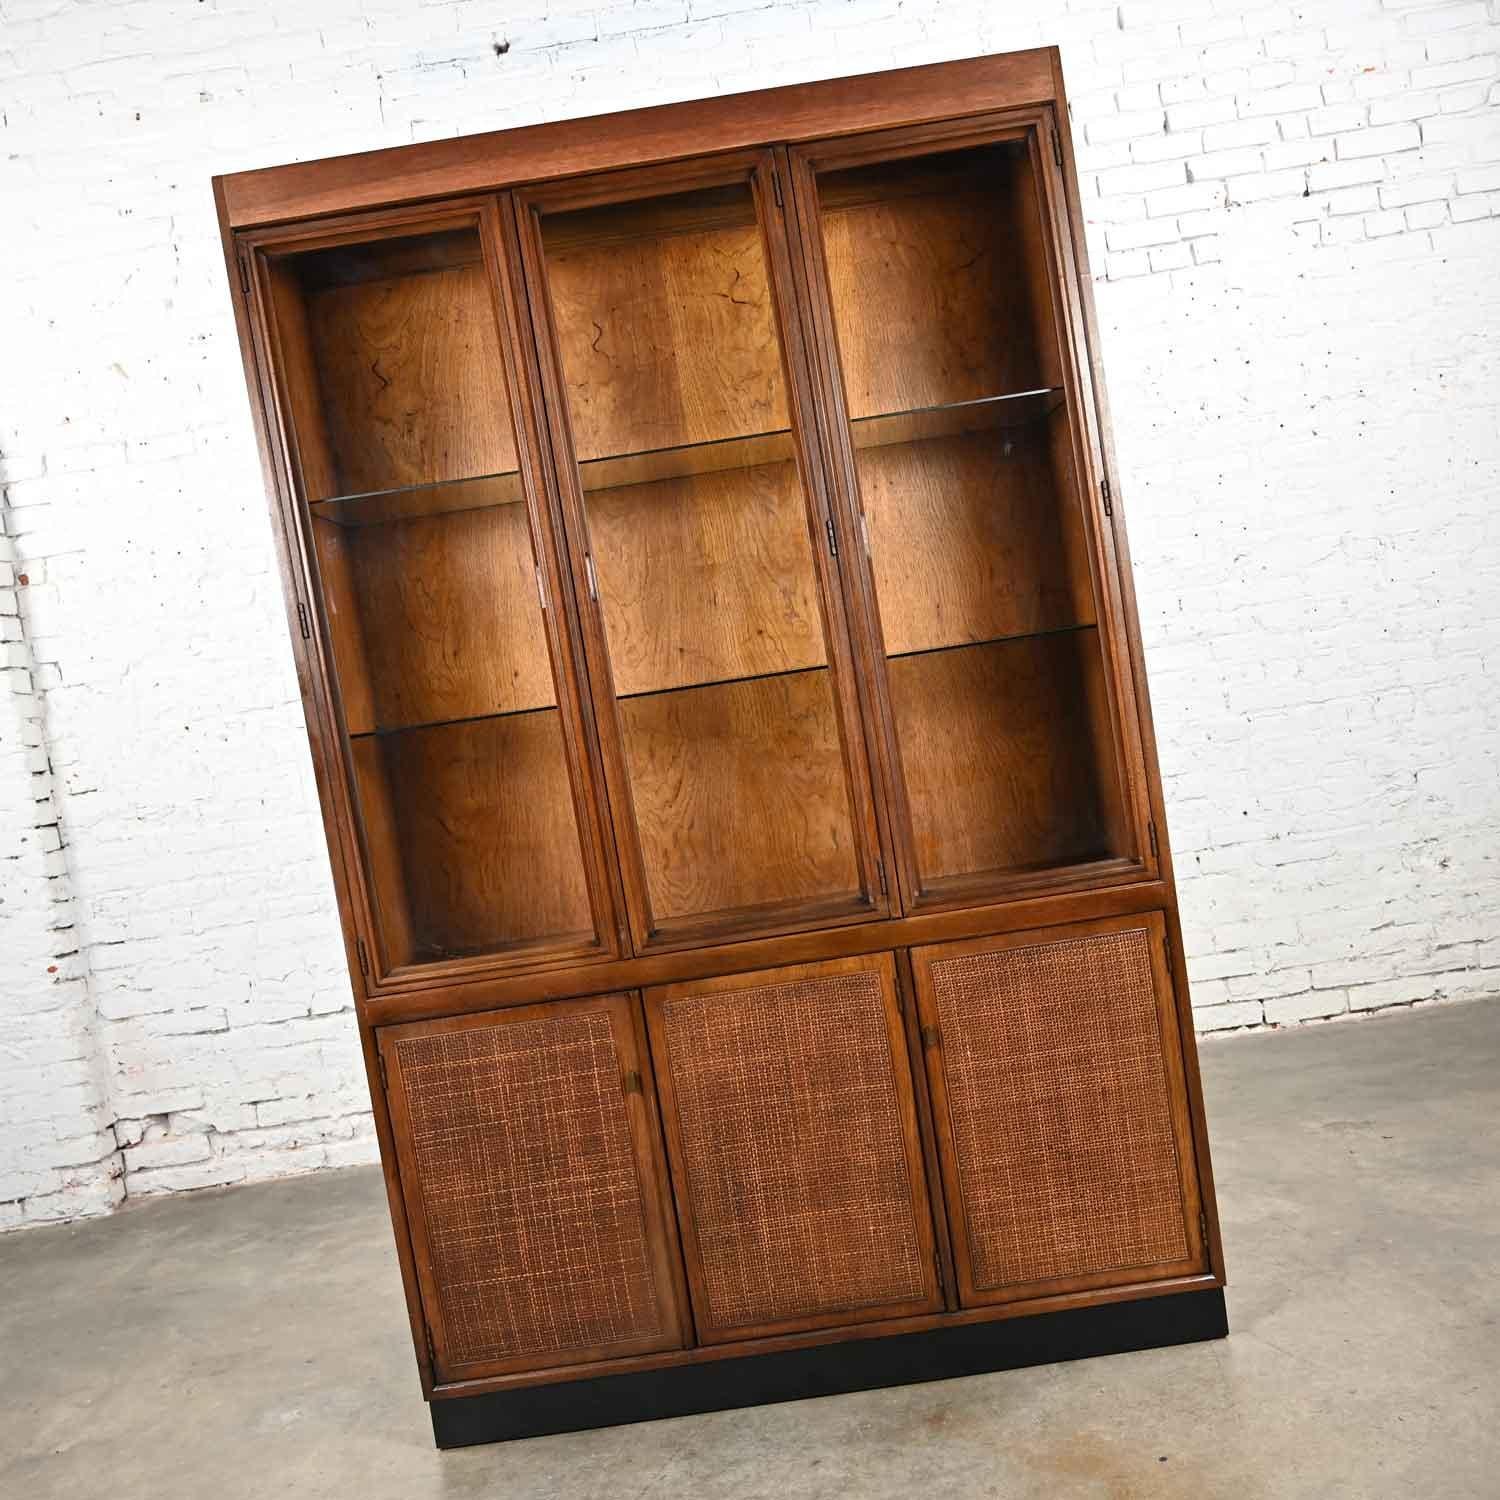 Fabulous vintage Mid-Century Modern 1 piece walnut & radio weave cane front lighted China cabinet, hutch, or display cabinet with glass shelves and brass knobs. Beautiful condition, keeping in mind that this is vintage and not new so will have signs